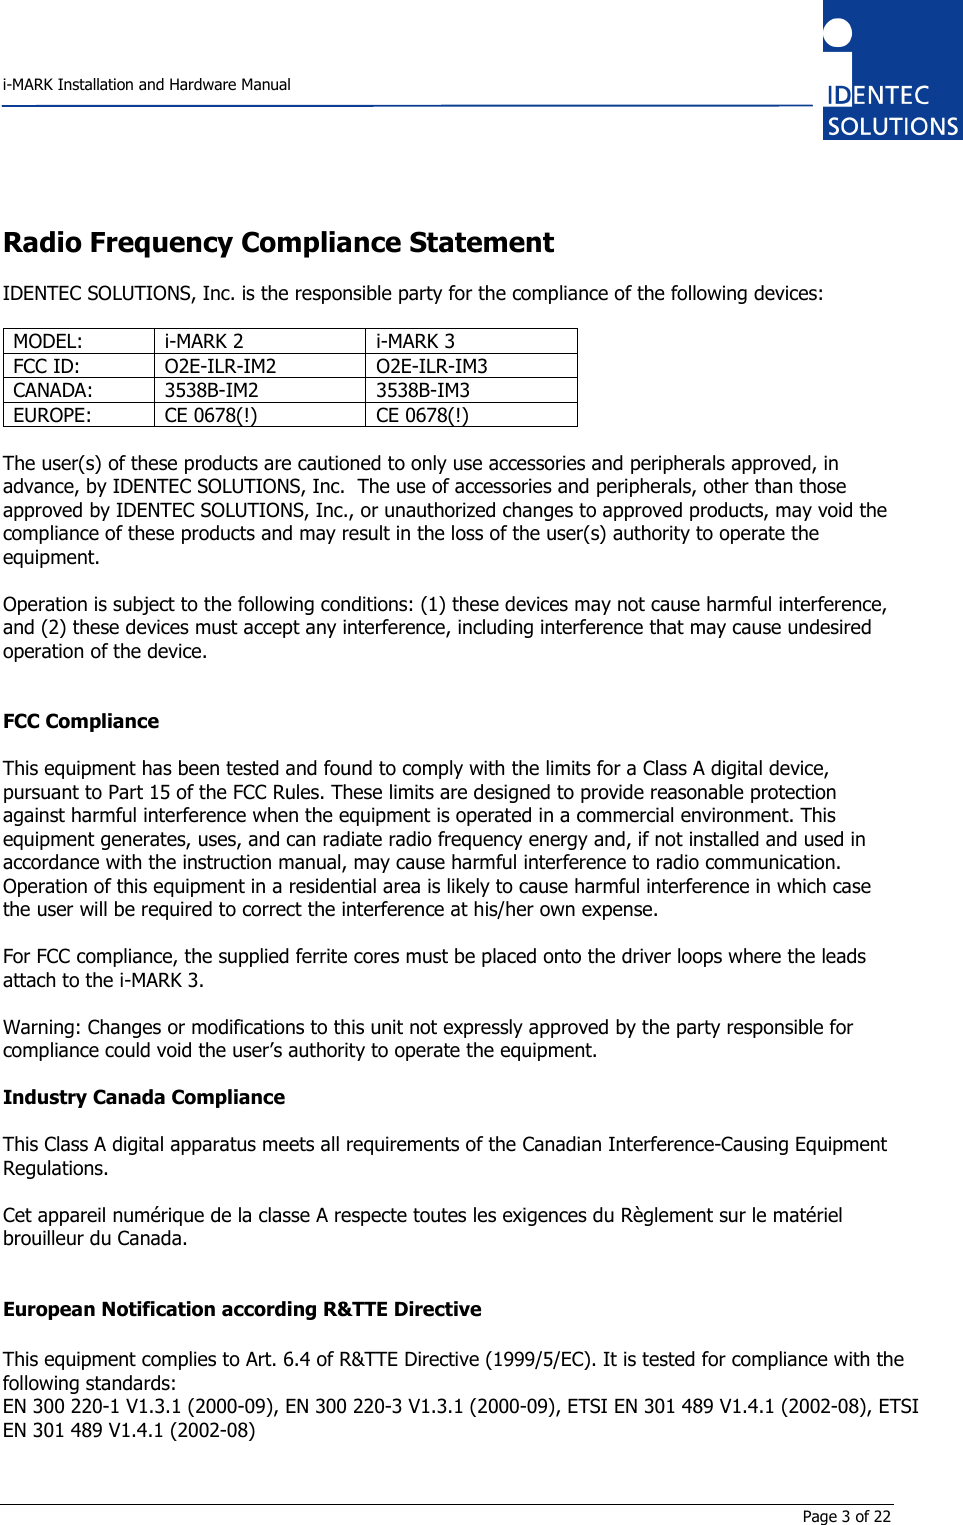    i-MARK Installation and Hardware Manual       Page 3 of 22 Radio Frequency Compliance Statement  IDENTEC SOLUTIONS, Inc. is the responsible party for the compliance of the following devices:  MODEL:  i-MARK 2  i-MARK 3 FCC ID:  O2E-ILR-IM2  O2E-ILR-IM3 CANADA:  3538B-IM2  3538B-IM3 EUROPE:  CE 0678(!)  CE 0678(!)  The user(s) of these products are cautioned to only use accessories and peripherals approved, in advance, by IDENTEC SOLUTIONS, Inc.  The use of accessories and peripherals, other than those approved by IDENTEC SOLUTIONS, Inc., or unauthorized changes to approved products, may void the compliance of these products and may result in the loss of the user(s) authority to operate the equipment.  Operation is subject to the following conditions: (1) these devices may not cause harmful interference, and (2) these devices must accept any interference, including interference that may cause undesired operation of the device.   FCC Compliance  This equipment has been tested and found to comply with the limits for a Class A digital device, pursuant to Part 15 of the FCC Rules. These limits are designed to provide reasonable protection against harmful interference when the equipment is operated in a commercial environment. This equipment generates, uses, and can radiate radio frequency energy and, if not installed and used in accordance with the instruction manual, may cause harmful interference to radio communication. Operation of this equipment in a residential area is likely to cause harmful interference in which case the user will be required to correct the interference at his/her own expense.  For FCC compliance, the supplied ferrite cores must be placed onto the driver loops where the leads attach to the i-MARK 3.  Warning: Changes or modifications to this unit not expressly approved by the party responsible for compliance could void the user’s authority to operate the equipment.  Industry Canada Compliance  This Class A digital apparatus meets all requirements of the Canadian Interference-Causing Equipment Regulations.  Cet appareil numérique de la classe A respecte toutes les exigences du Règlement sur le matériel brouilleur du Canada.   European Notification according R&amp;TTE Directive  This equipment complies to Art. 6.4 of R&amp;TTE Directive (1999/5/EC). It is tested for compliance with the following standards: EN 300 220-1 V1.3.1 (2000-09), EN 300 220-3 V1.3.1 (2000-09), ETSI EN 301 489 V1.4.1 (2002-08), ETSI EN 301 489 V1.4.1 (2002-08) 